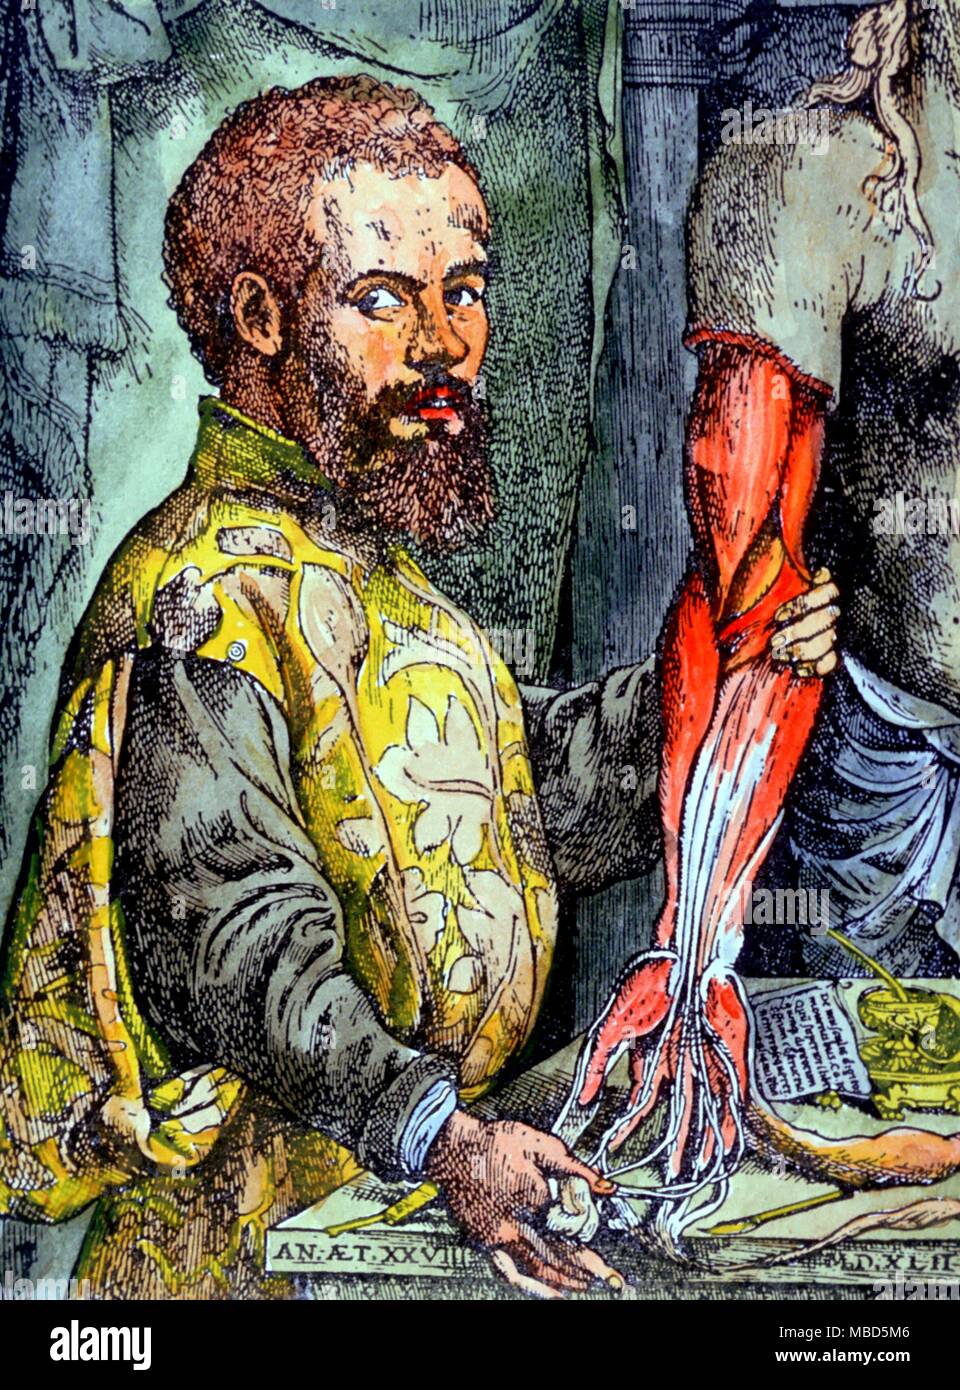 Medical - Vesalius. Portrait of the great anatomist, Andreas Vesalius, in 1543. His first human dissection was on a skeleton he stole from the gallows of the city of Louvain. Stock Photo